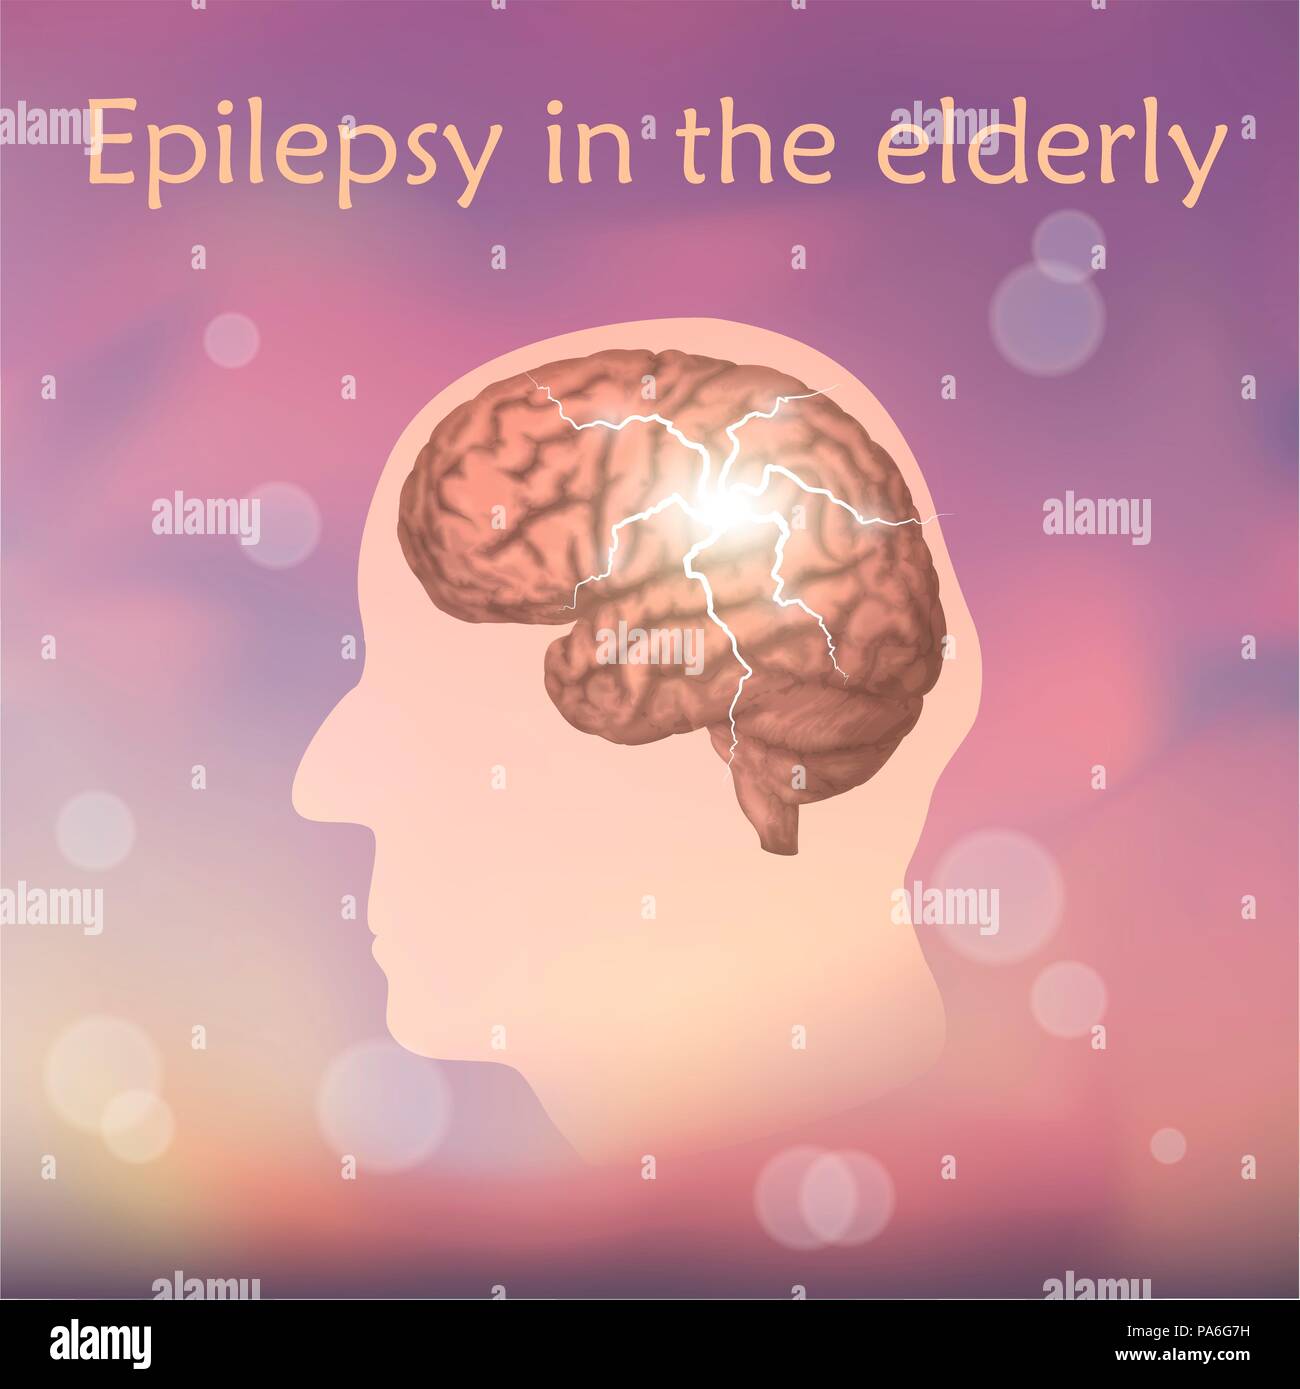 Epilepsy in the elderly, illustration. Electrical discharge in an old man's brain. Stock Photo